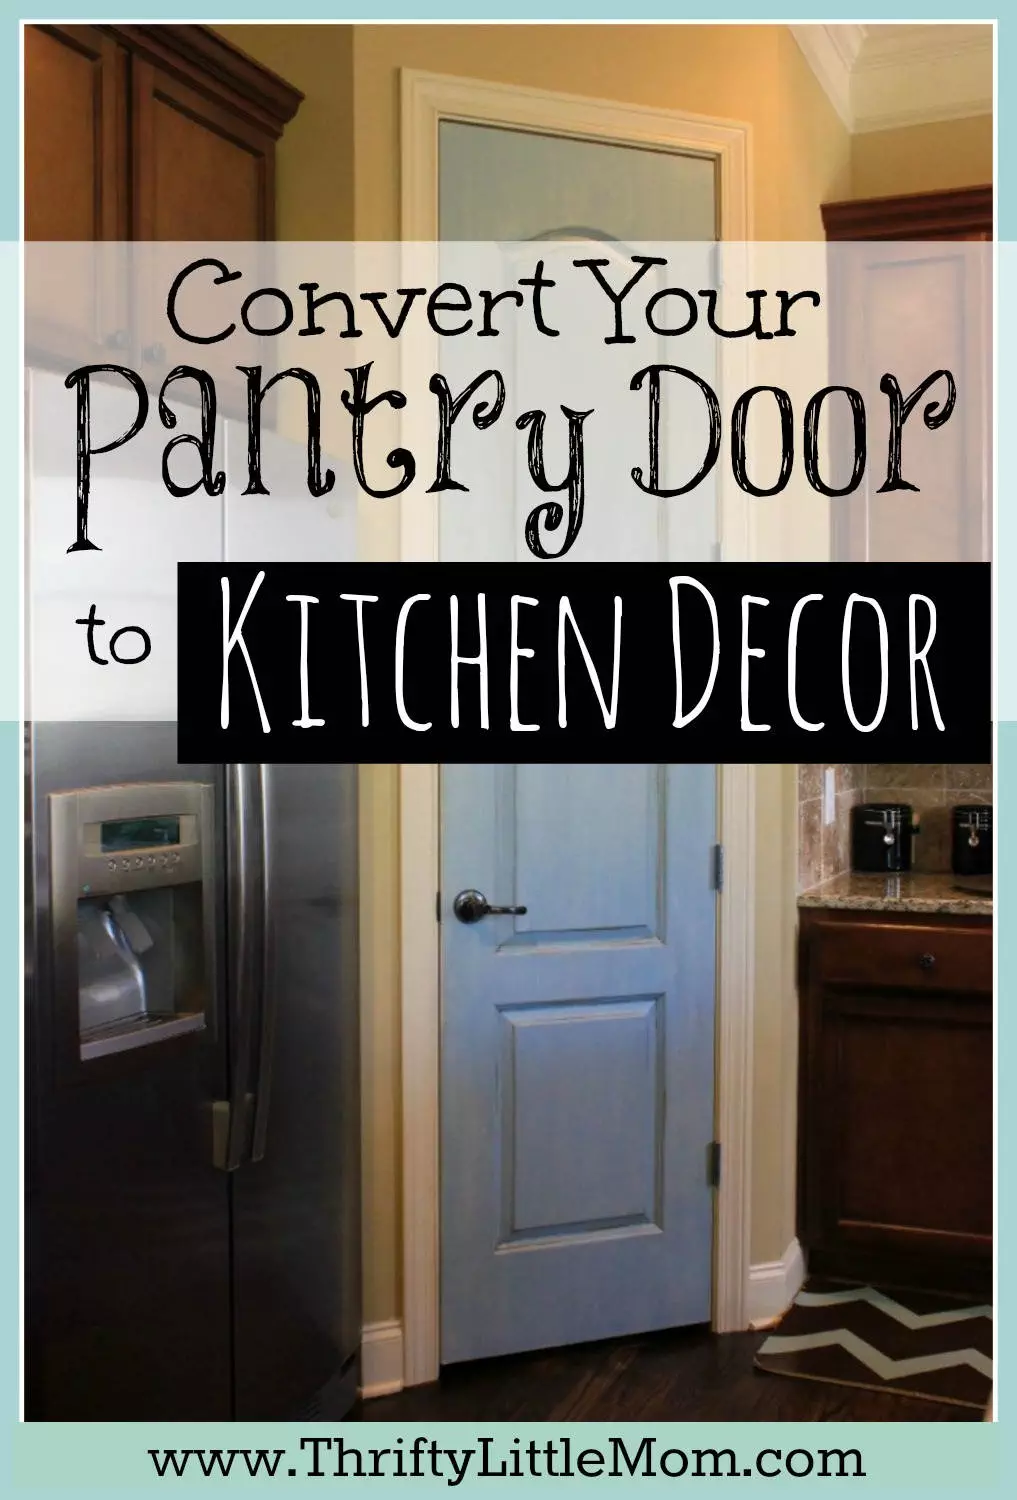 Convert Your Plain Pantry Door Into Kitchen Decor with this simple tutorial